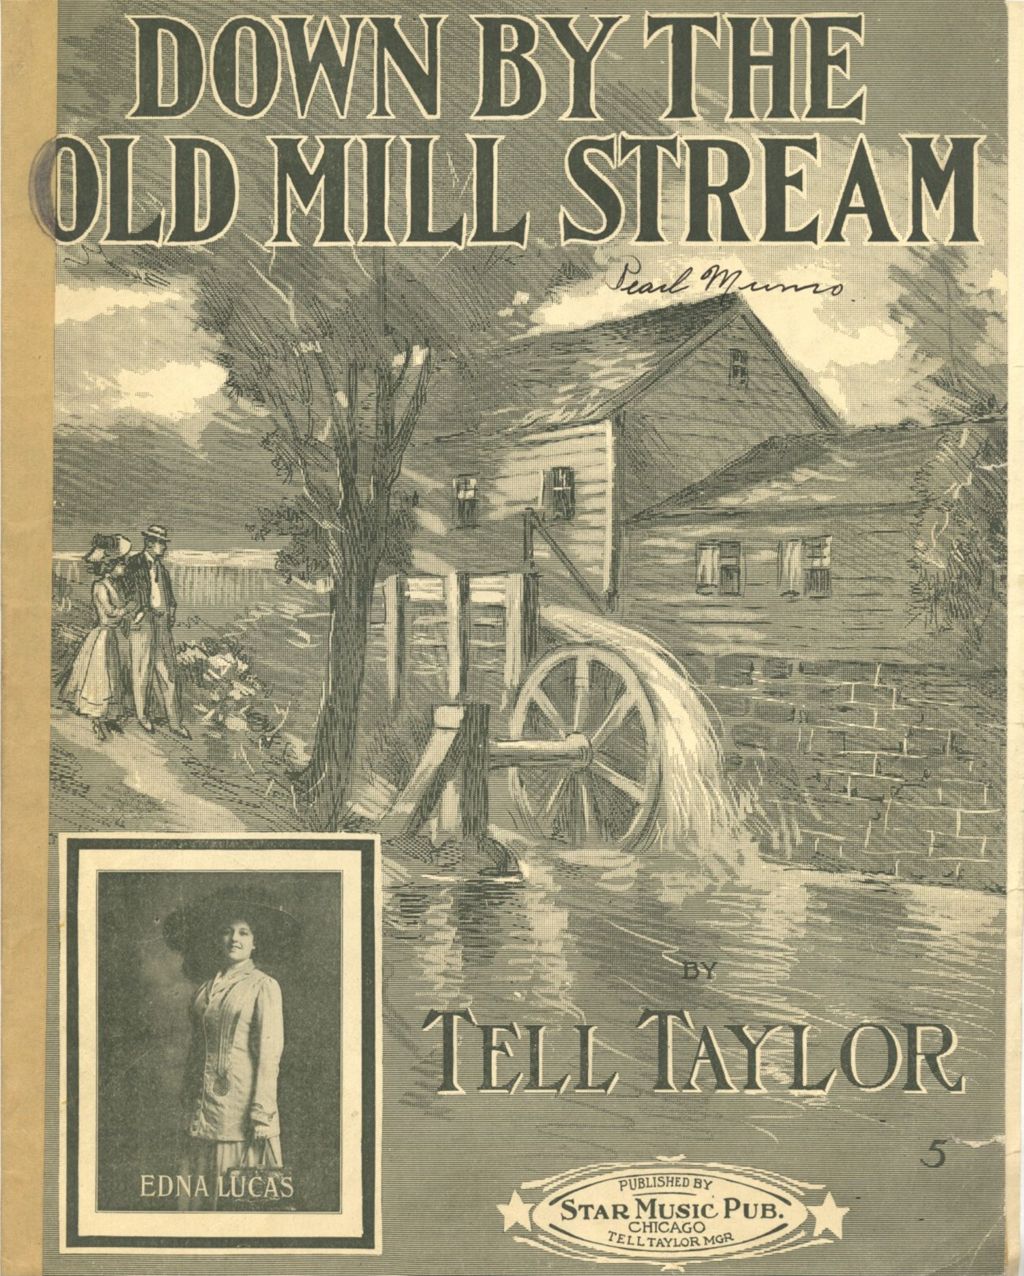 Down By the Old Mill Stream